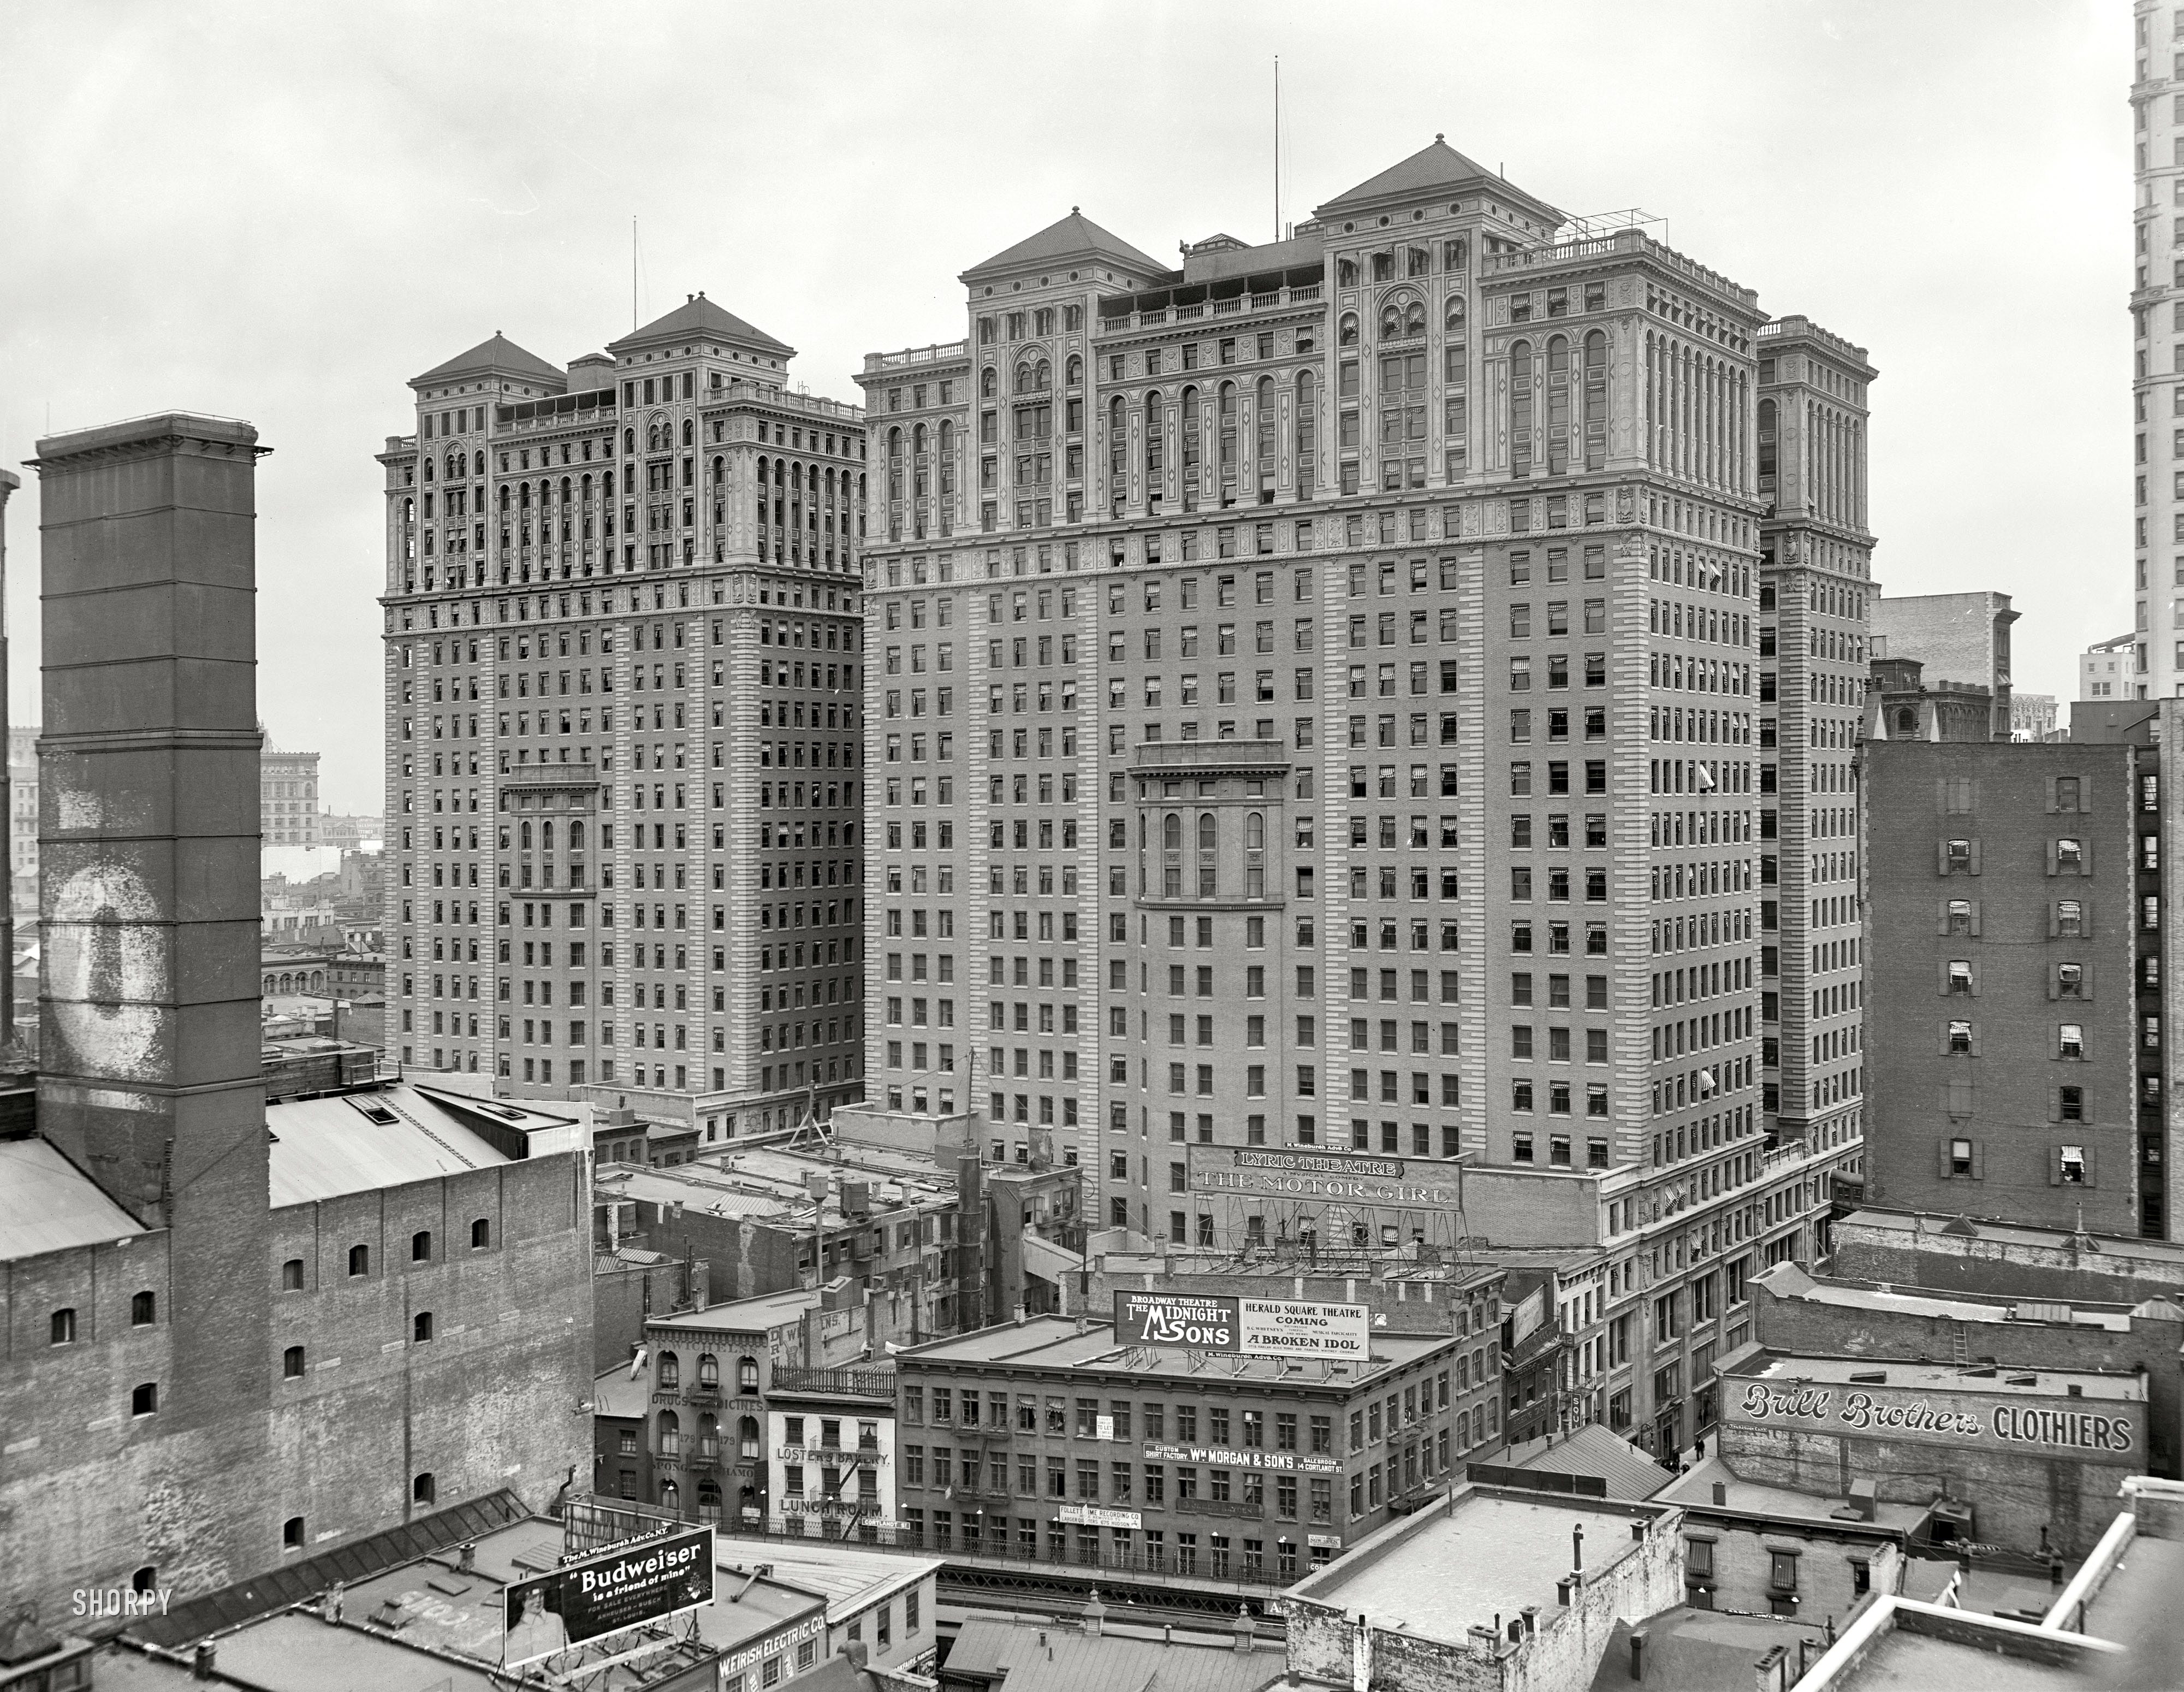 New York circa 1909. "Hudson Terminal Buildings." At the site of the future World Trade Center, a panorama encompassing the theatrical as well as the architectural. 8x10 glass negative, Detroit Publishing Co. View full size.